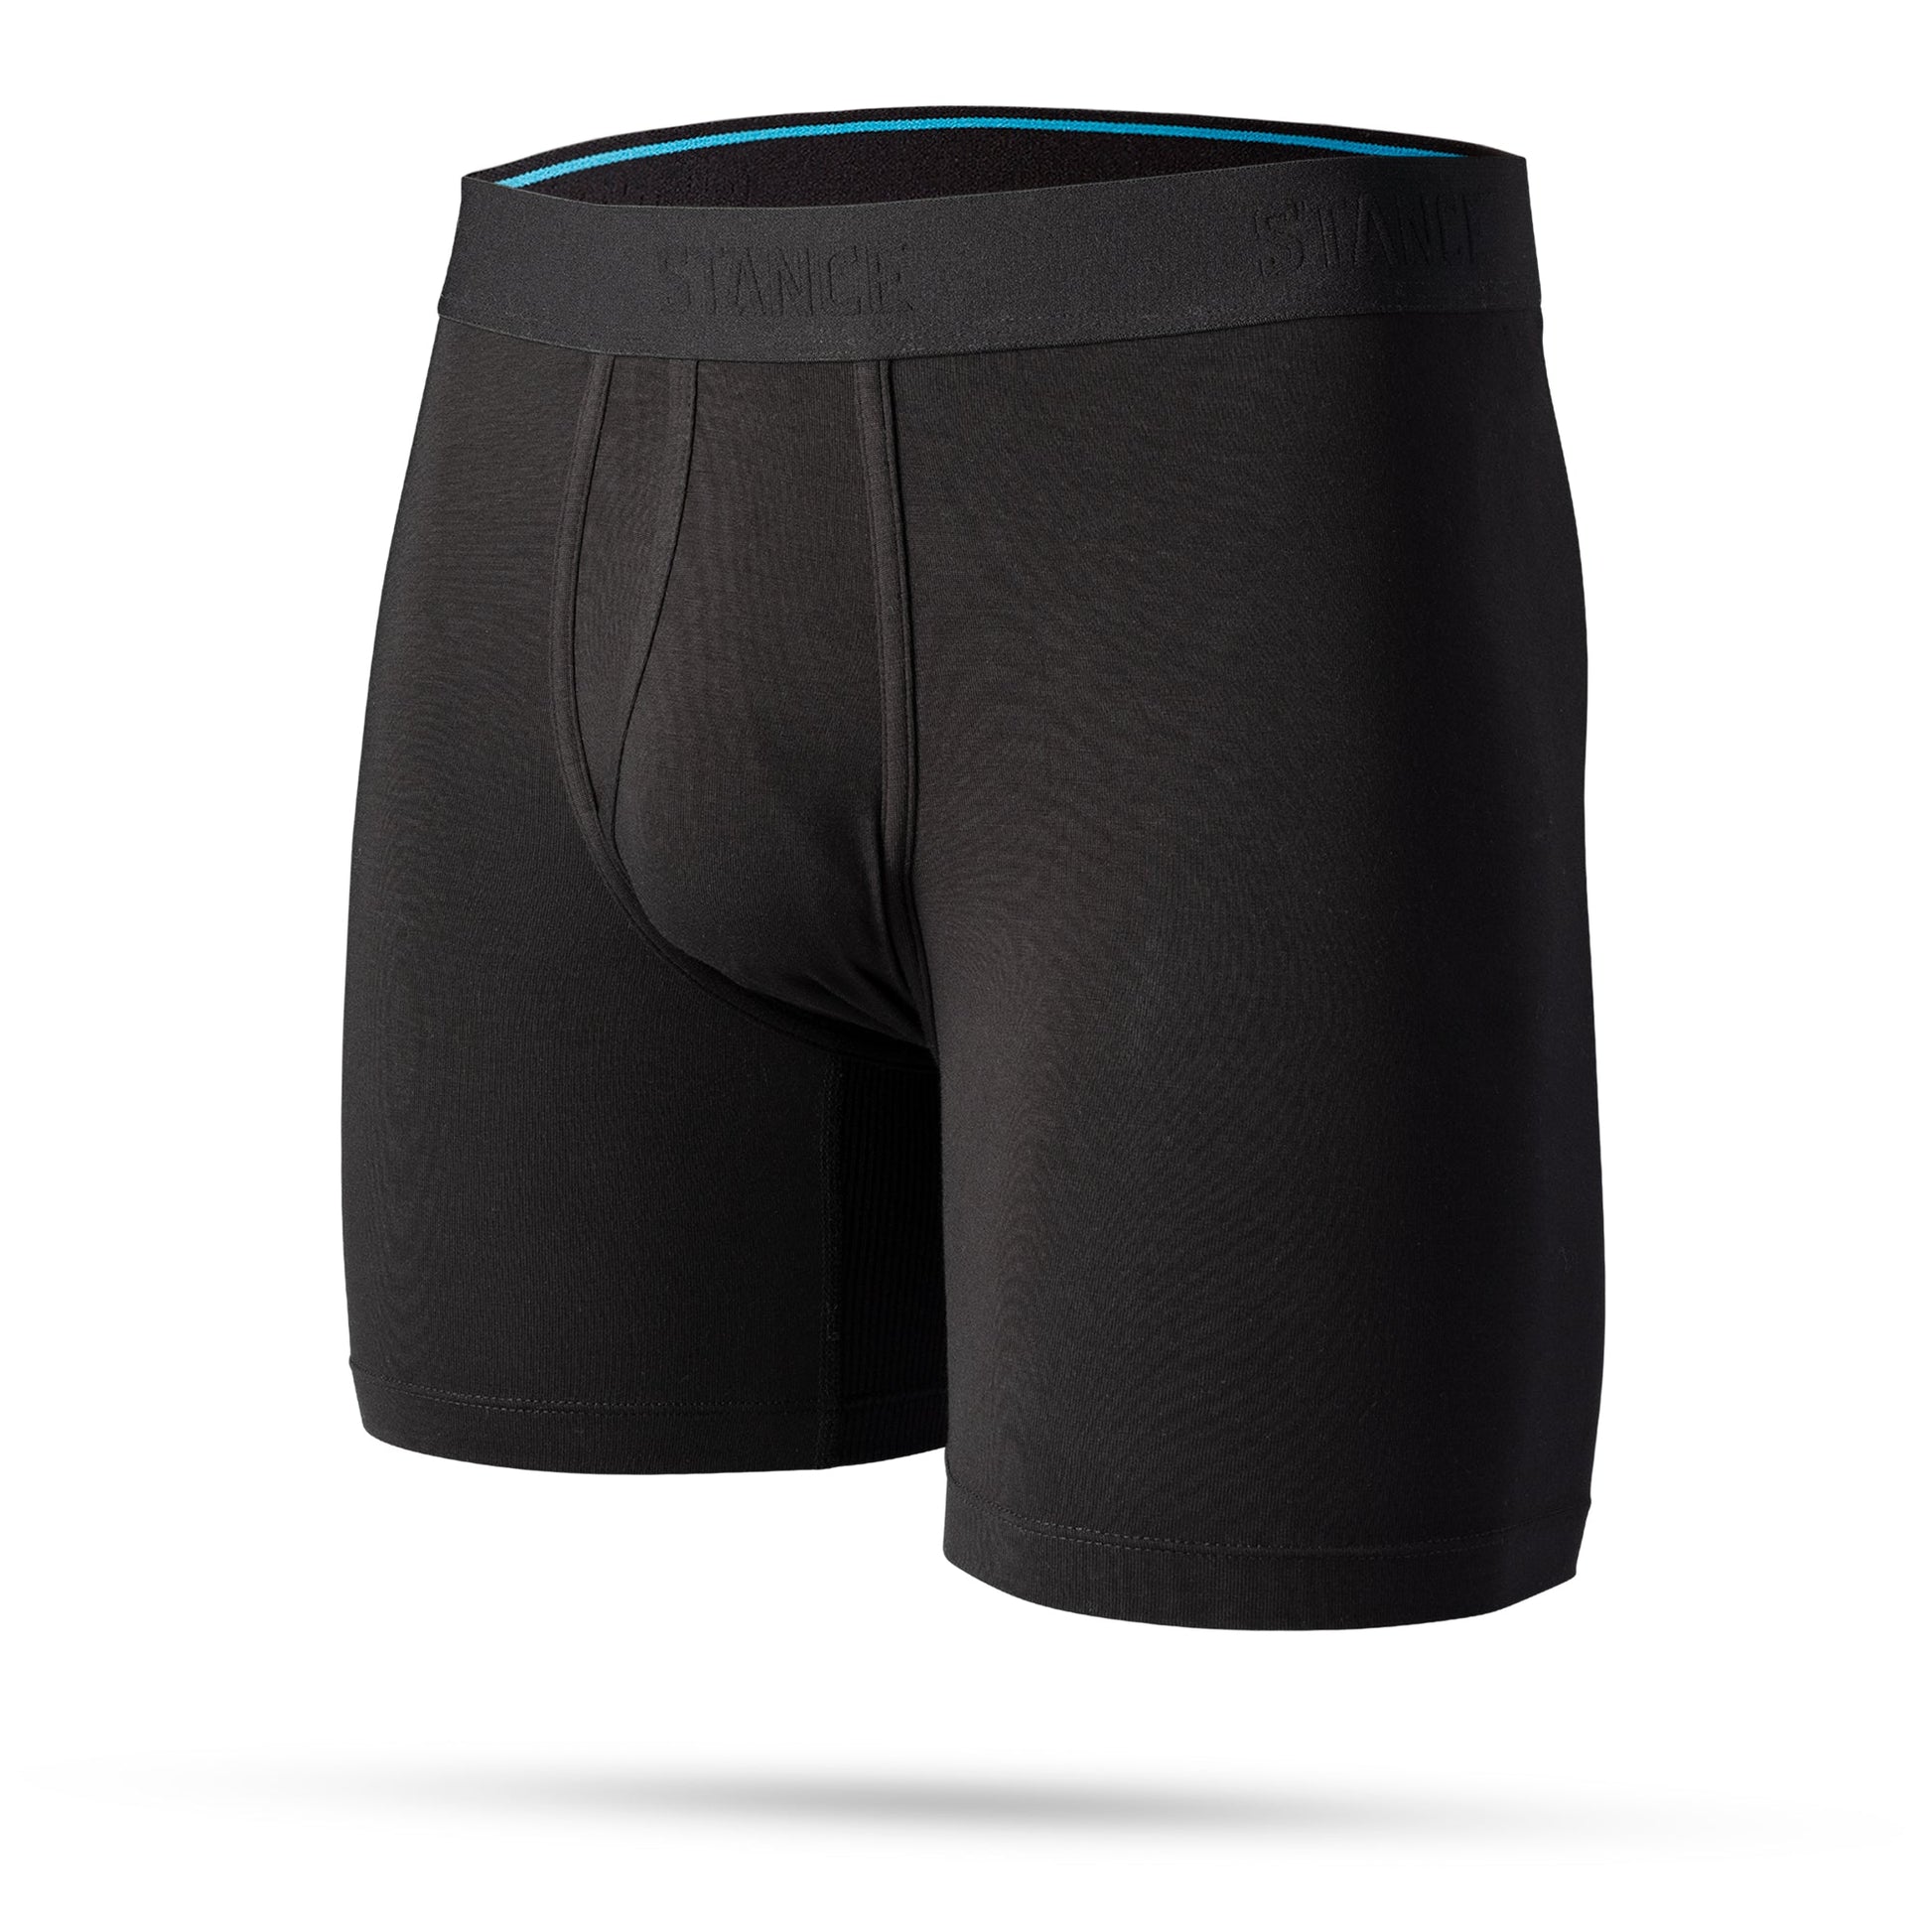 Stance Staple Boxer Brief Wholester Black – Stance Europe